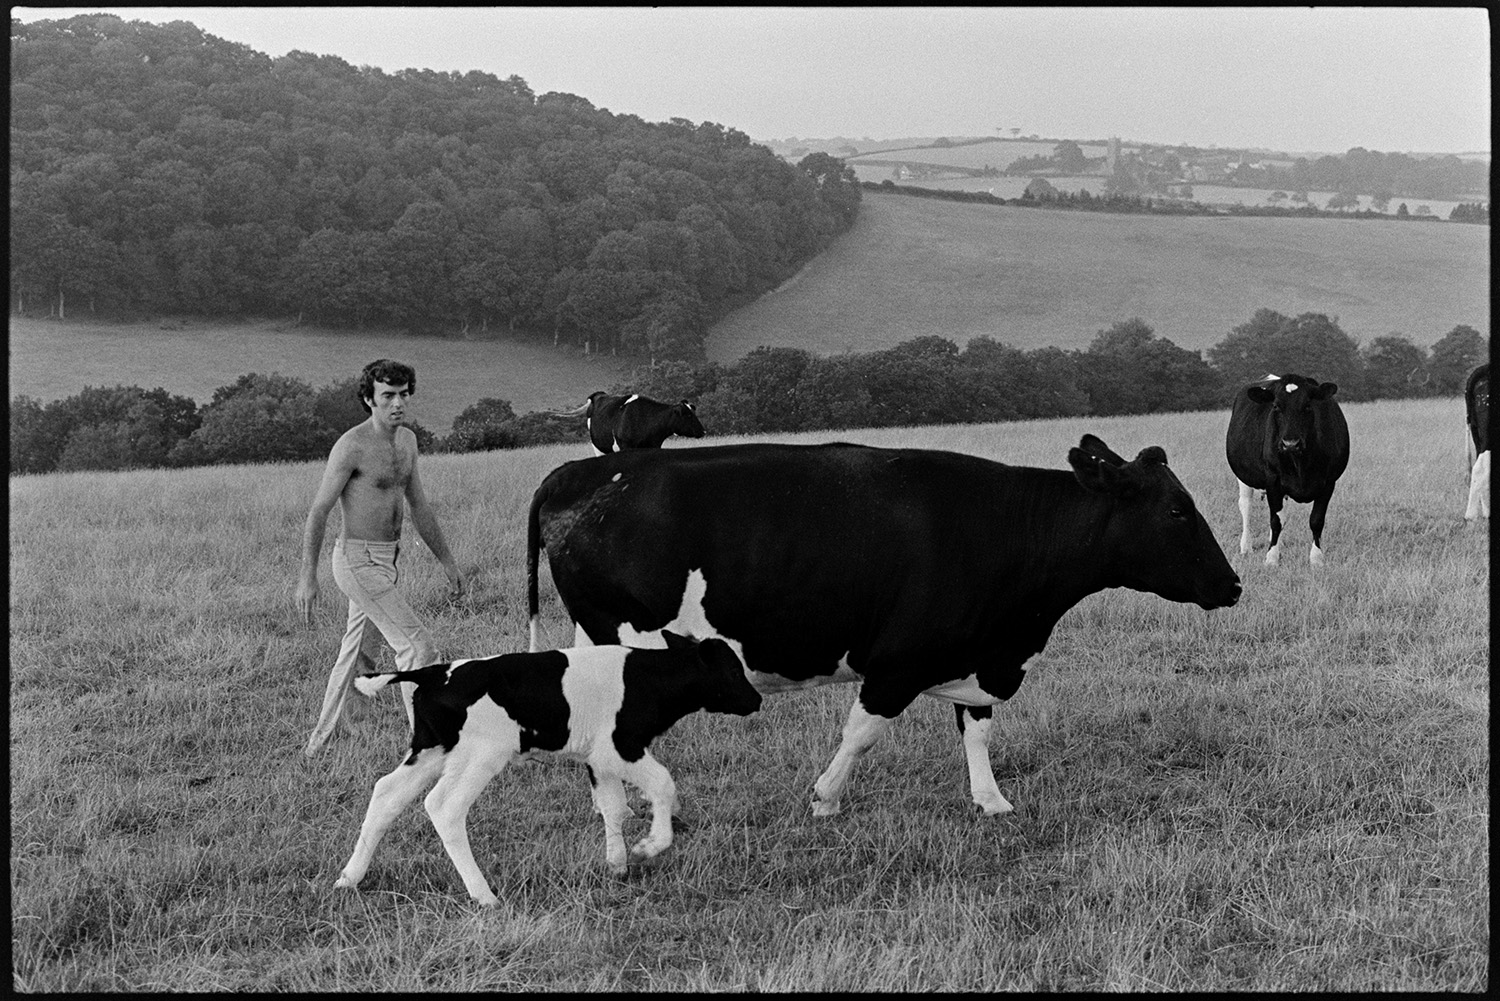 Farmer with cow and calf, wood in background. 
[Graham Ward herding cows and a calf in a field at Parsonage, Iddesleigh. A wood, fields and hedges are visible in the background.